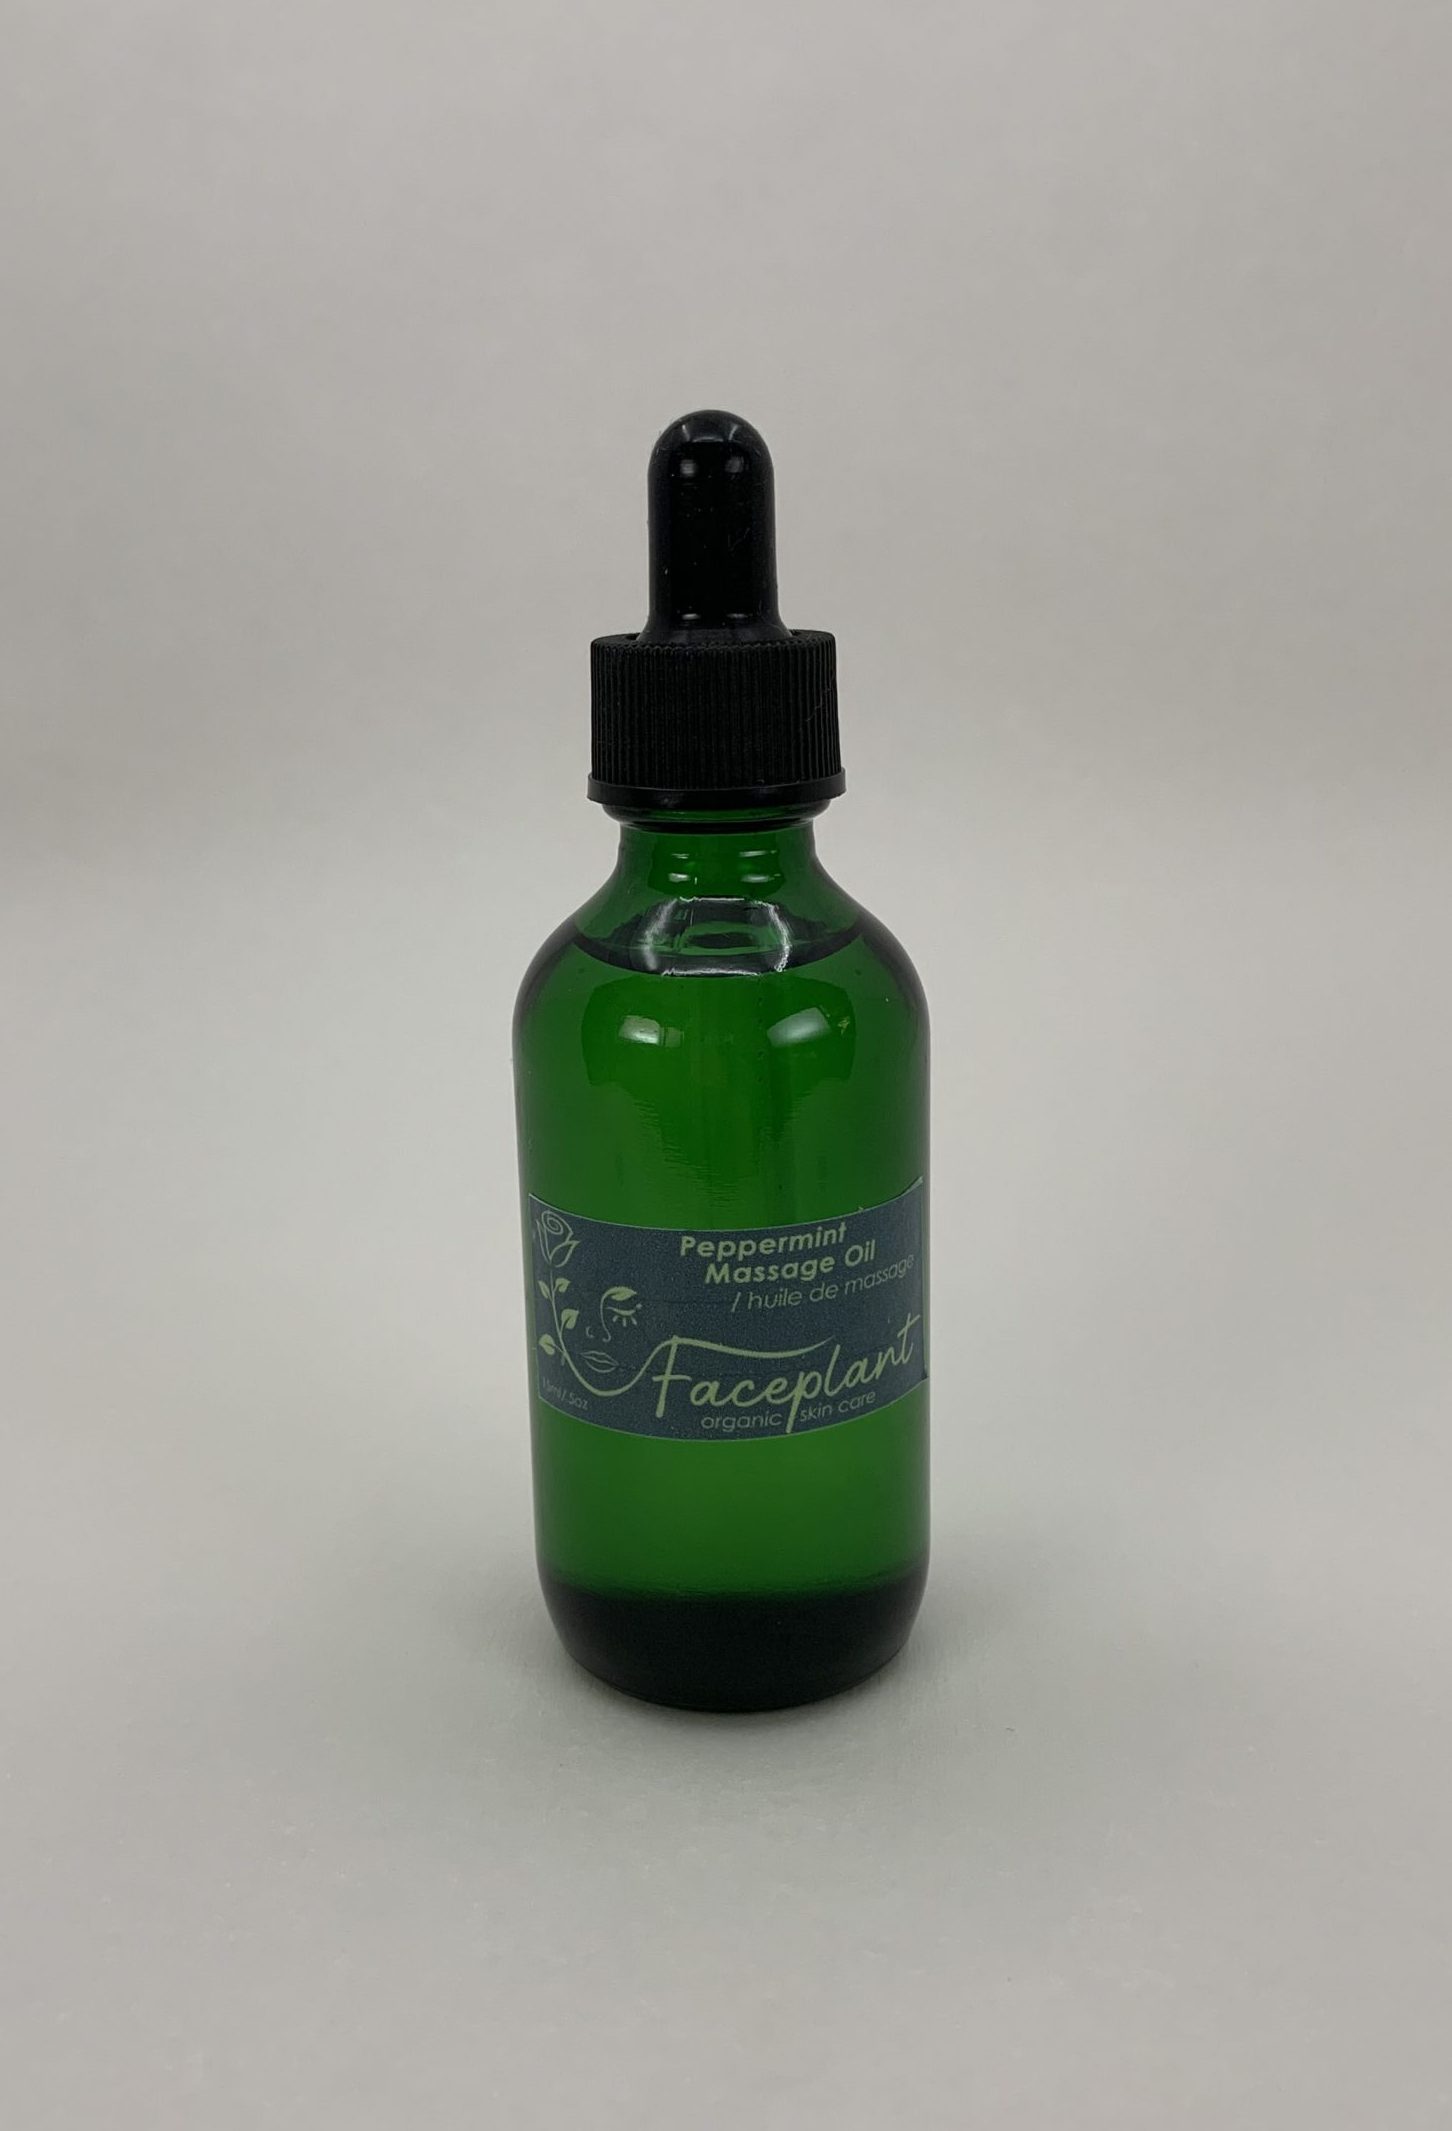 Peppermint Massage Oil Organic Skin Care Natural Beauty Health Products Blog